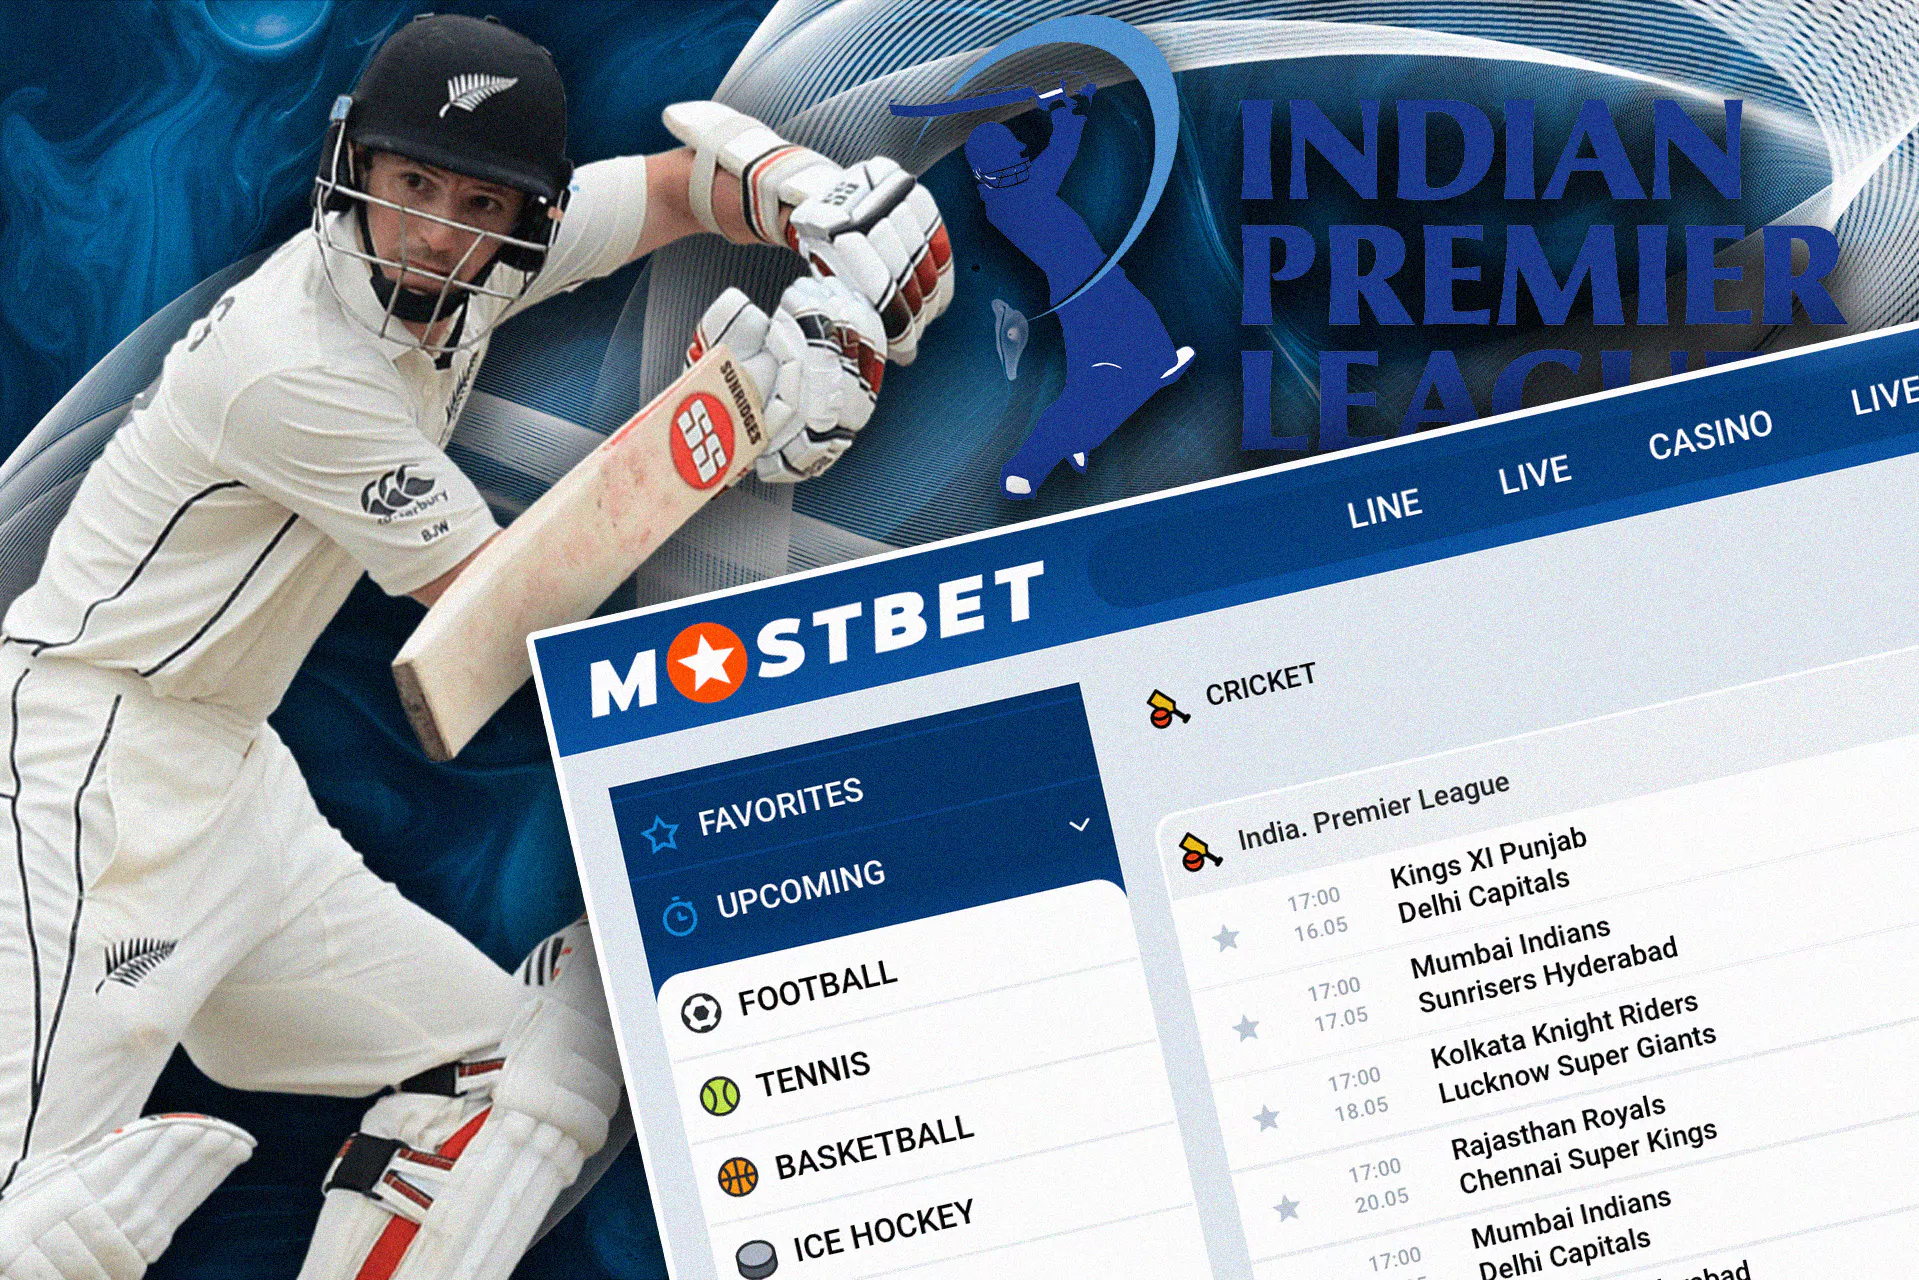 Cricket betting section of the site, betting on the Indian Premier League.